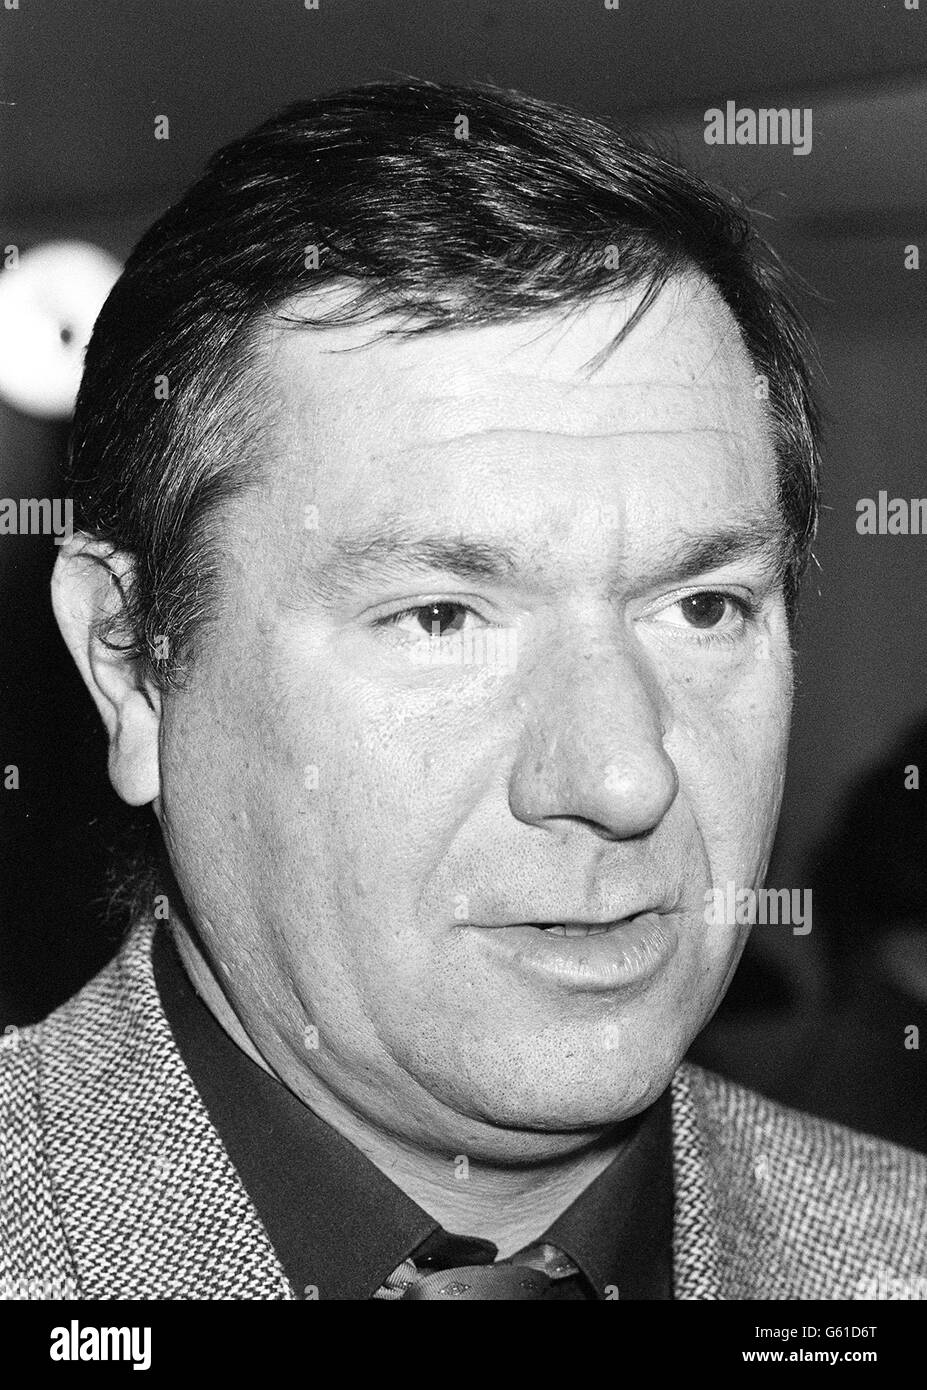 Michael Elphick, the Chichester-born actor, who spent 18 years in his profession and found house-hold fame in TV serial, Private Schultz. * 9/9/02: Michael Elphick, 55, the Chichester-born actor died in hospital after collapsing Stock Photo